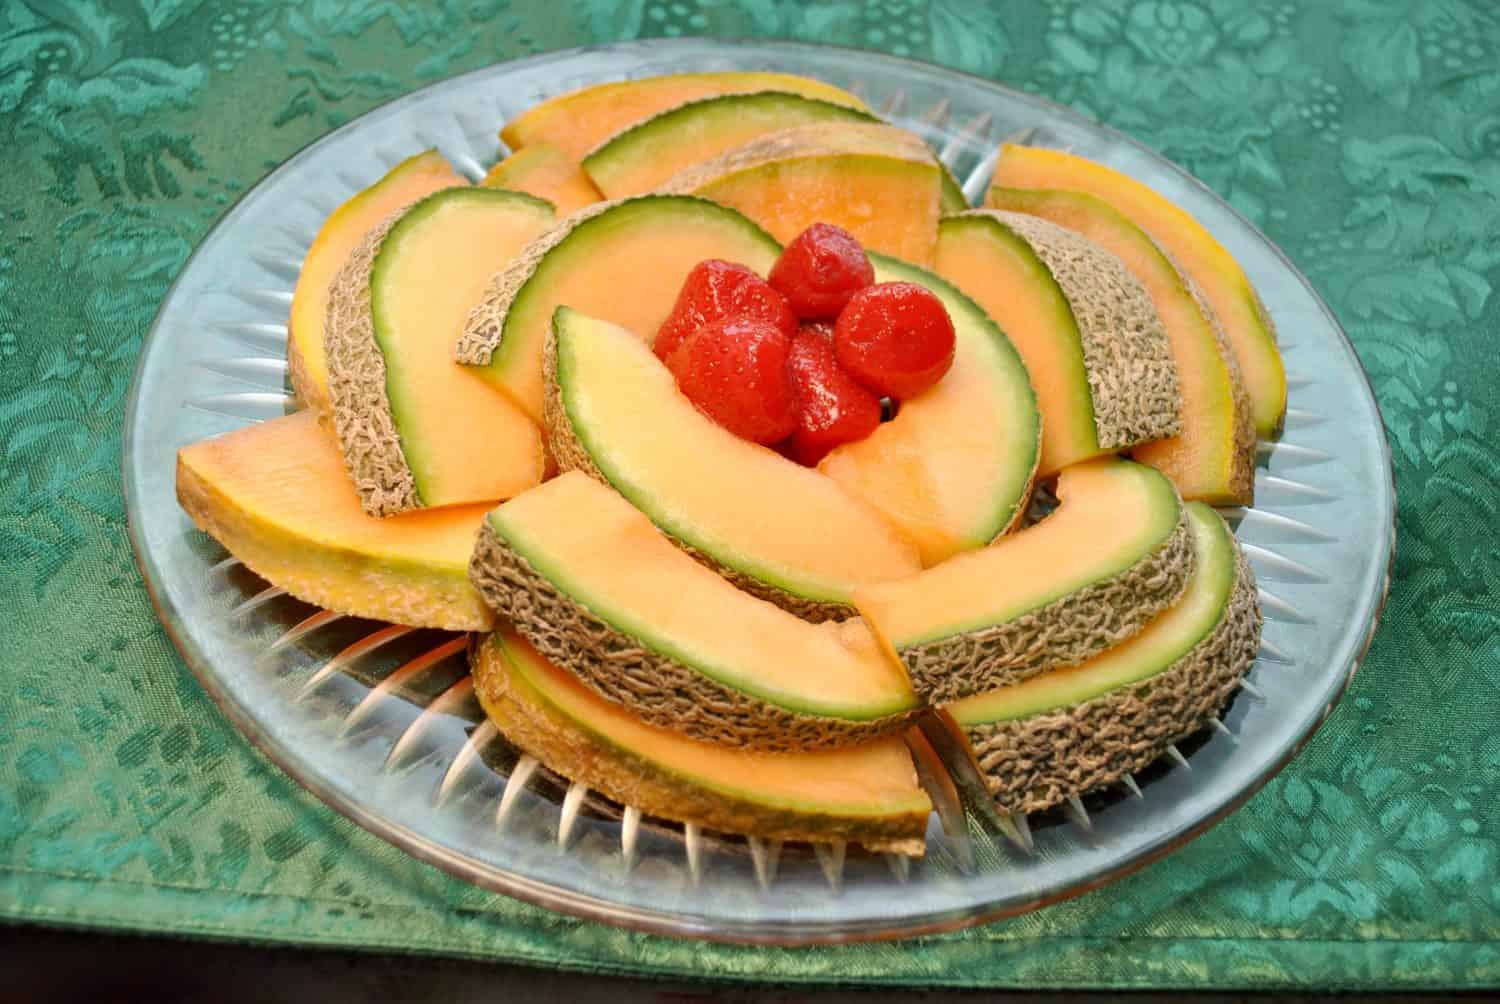 Breakfast Cantaloupe with Fresh Strawberries on a Glass Platter